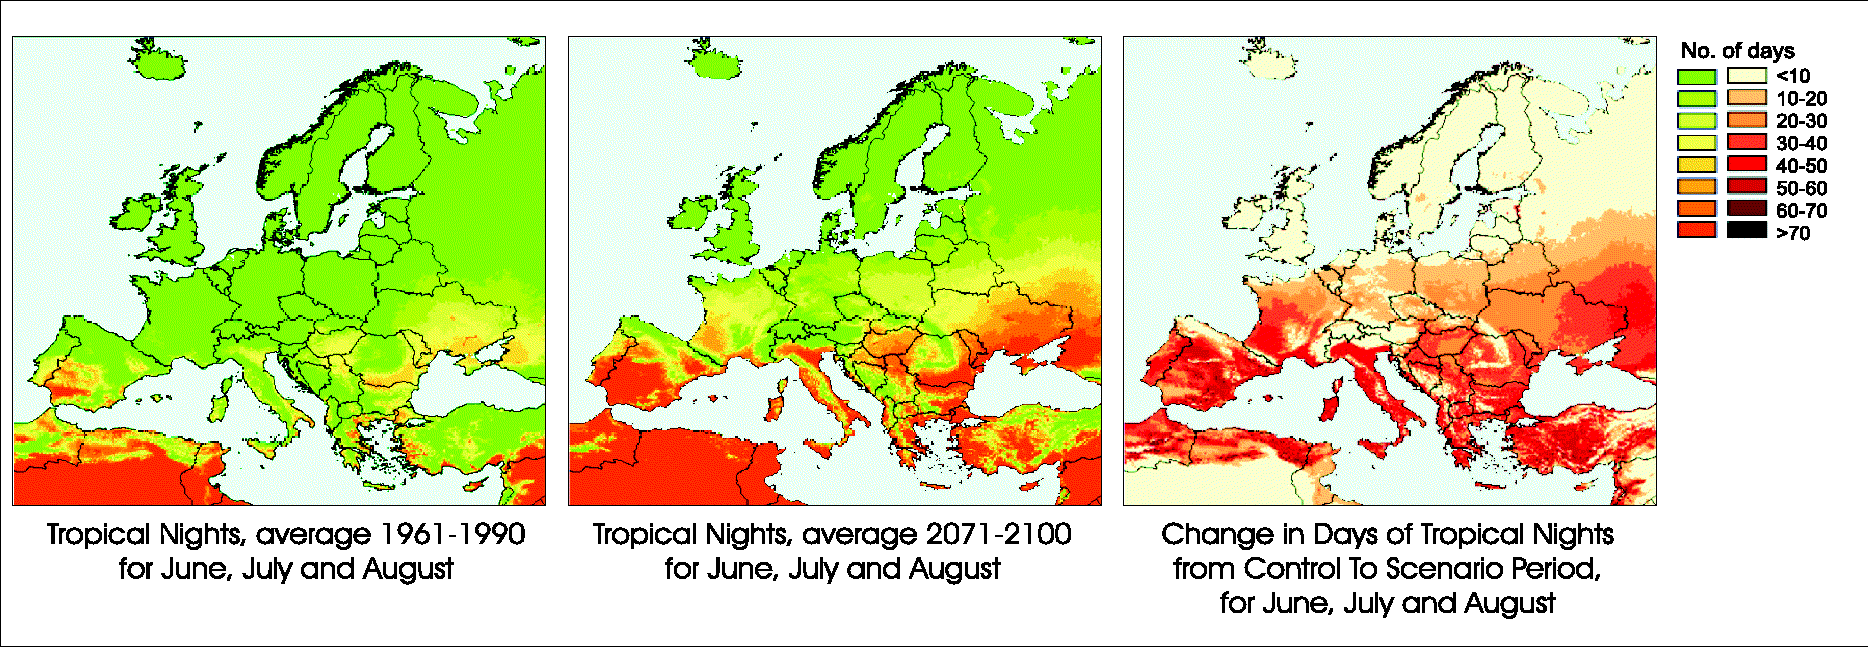 map%205.7%20climate%20change%202008%20-%20tropical%20nights.eps.75dpi.gif